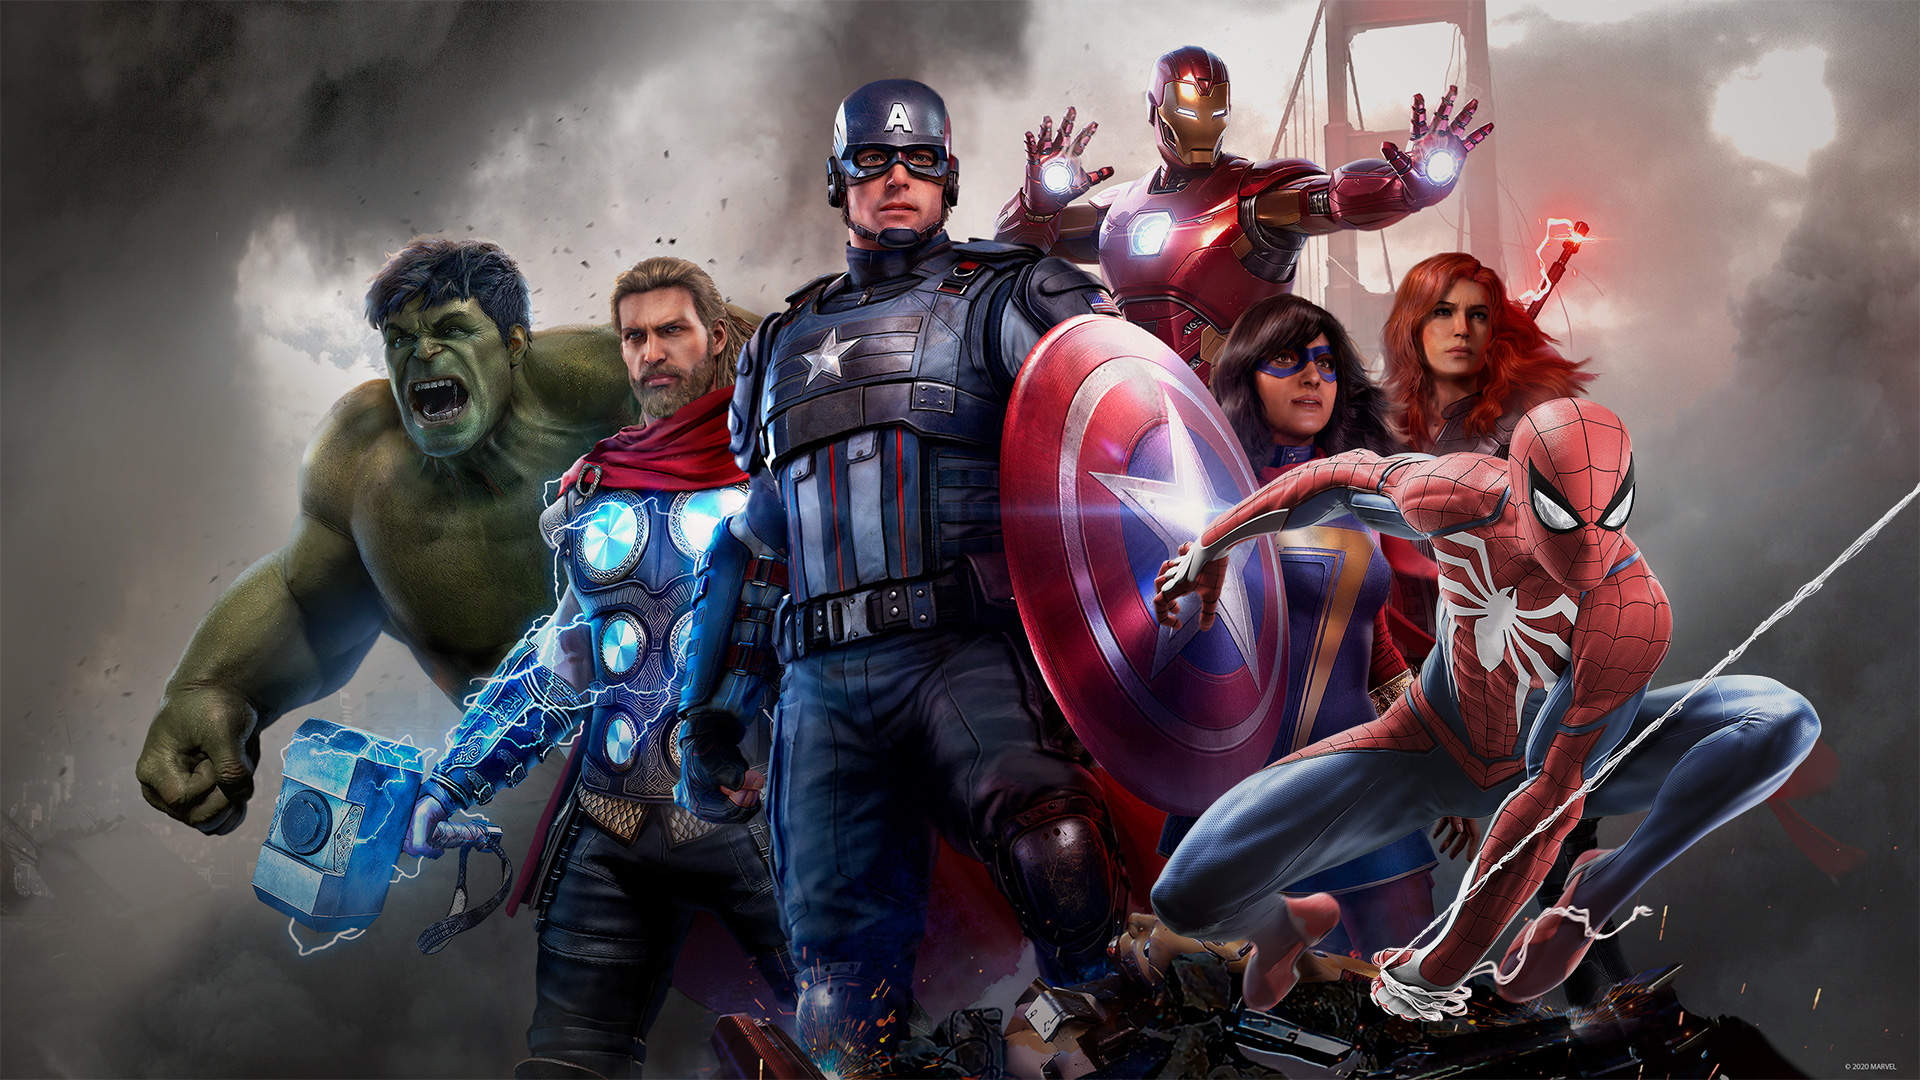 Marvel Studios President Kevin Feige Shares New ‘Avengers’ Movies are On the Way!